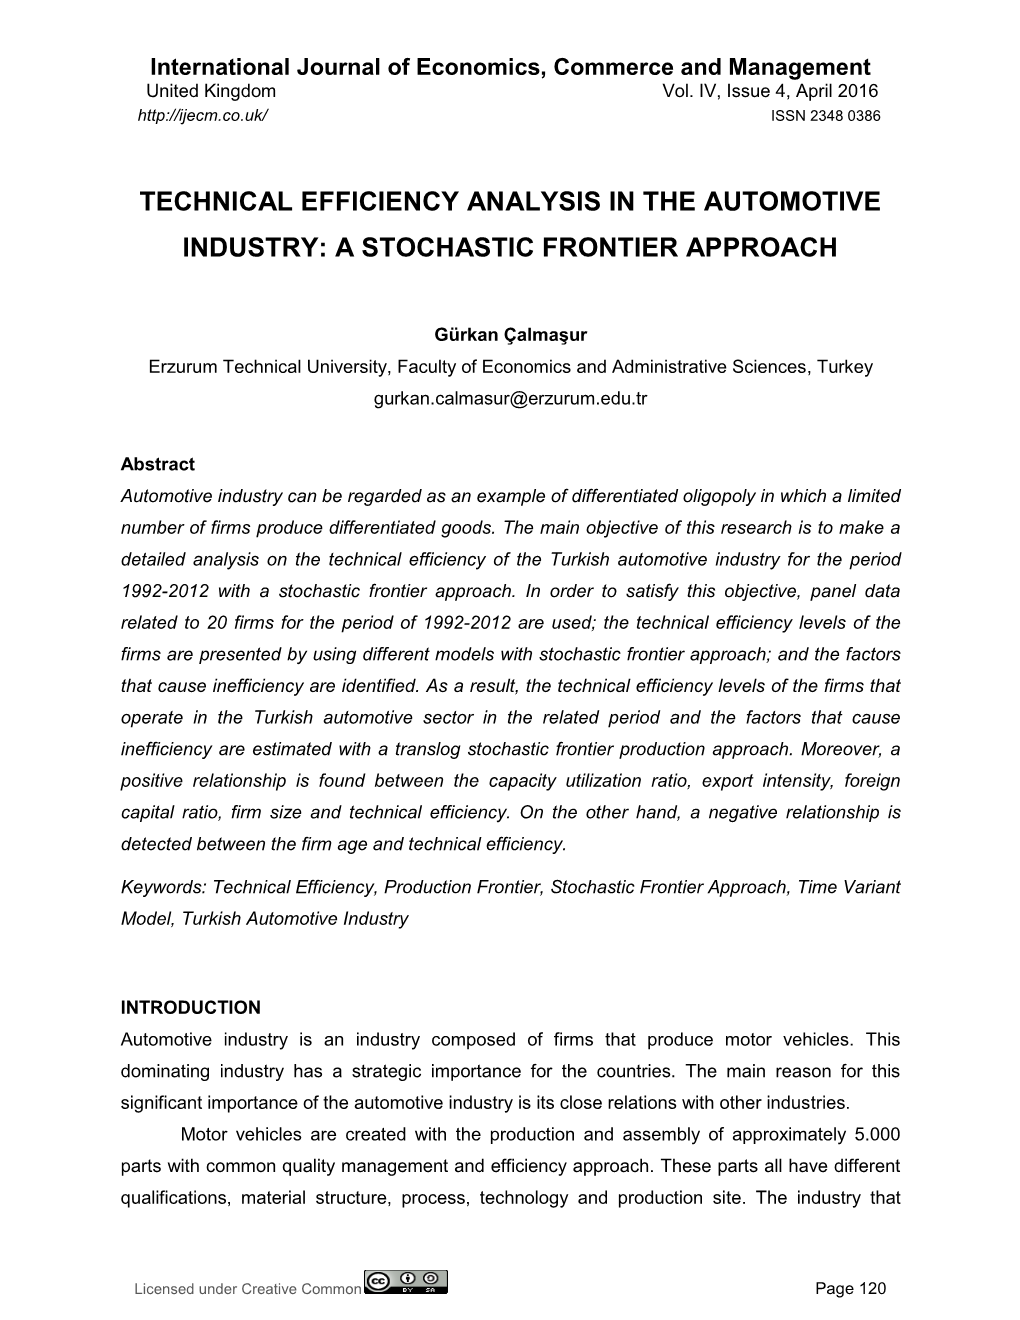 Technical Efficiency Analysis in the Automotive Industry: a Stochastic Frontier Approach